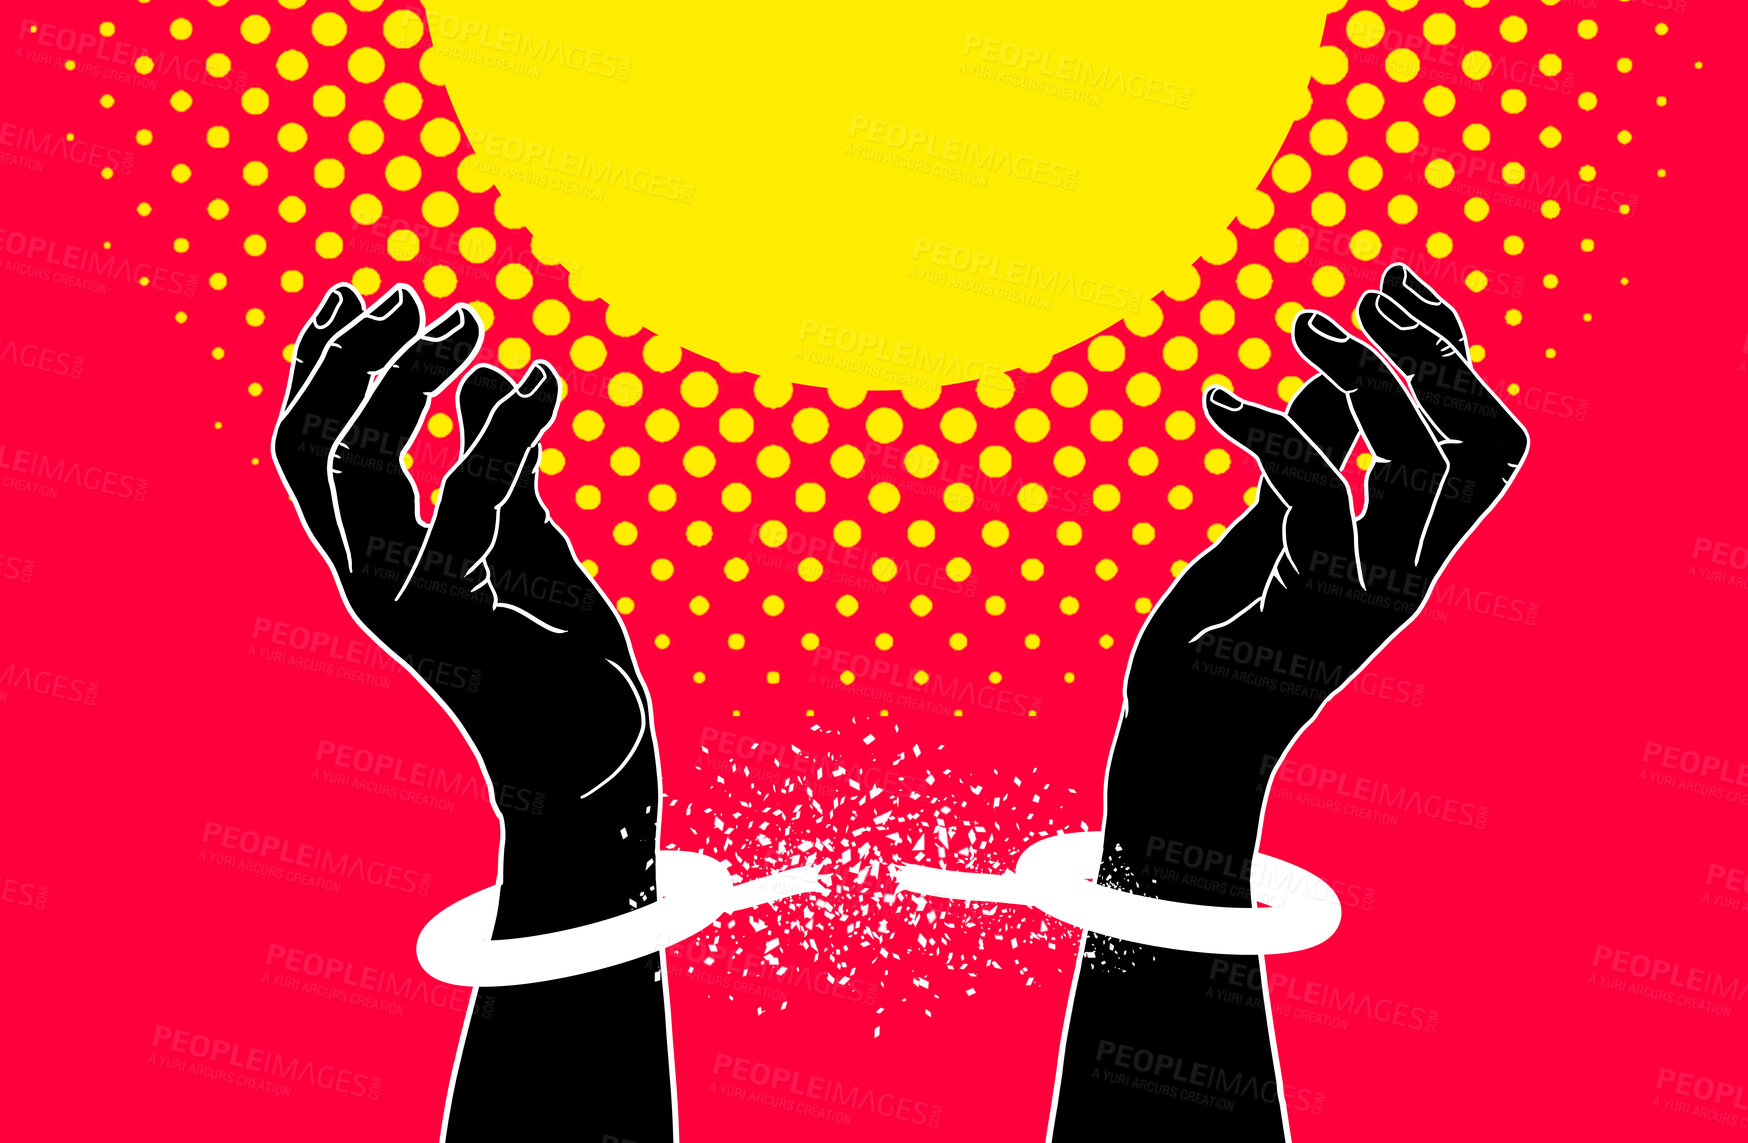 Buy stock photo Hands, break cuffs and freedom in illustration, art or strong for human rights, stop oppression or red background. Protest, power and justice for equality, end modern slavery and creativity for peace